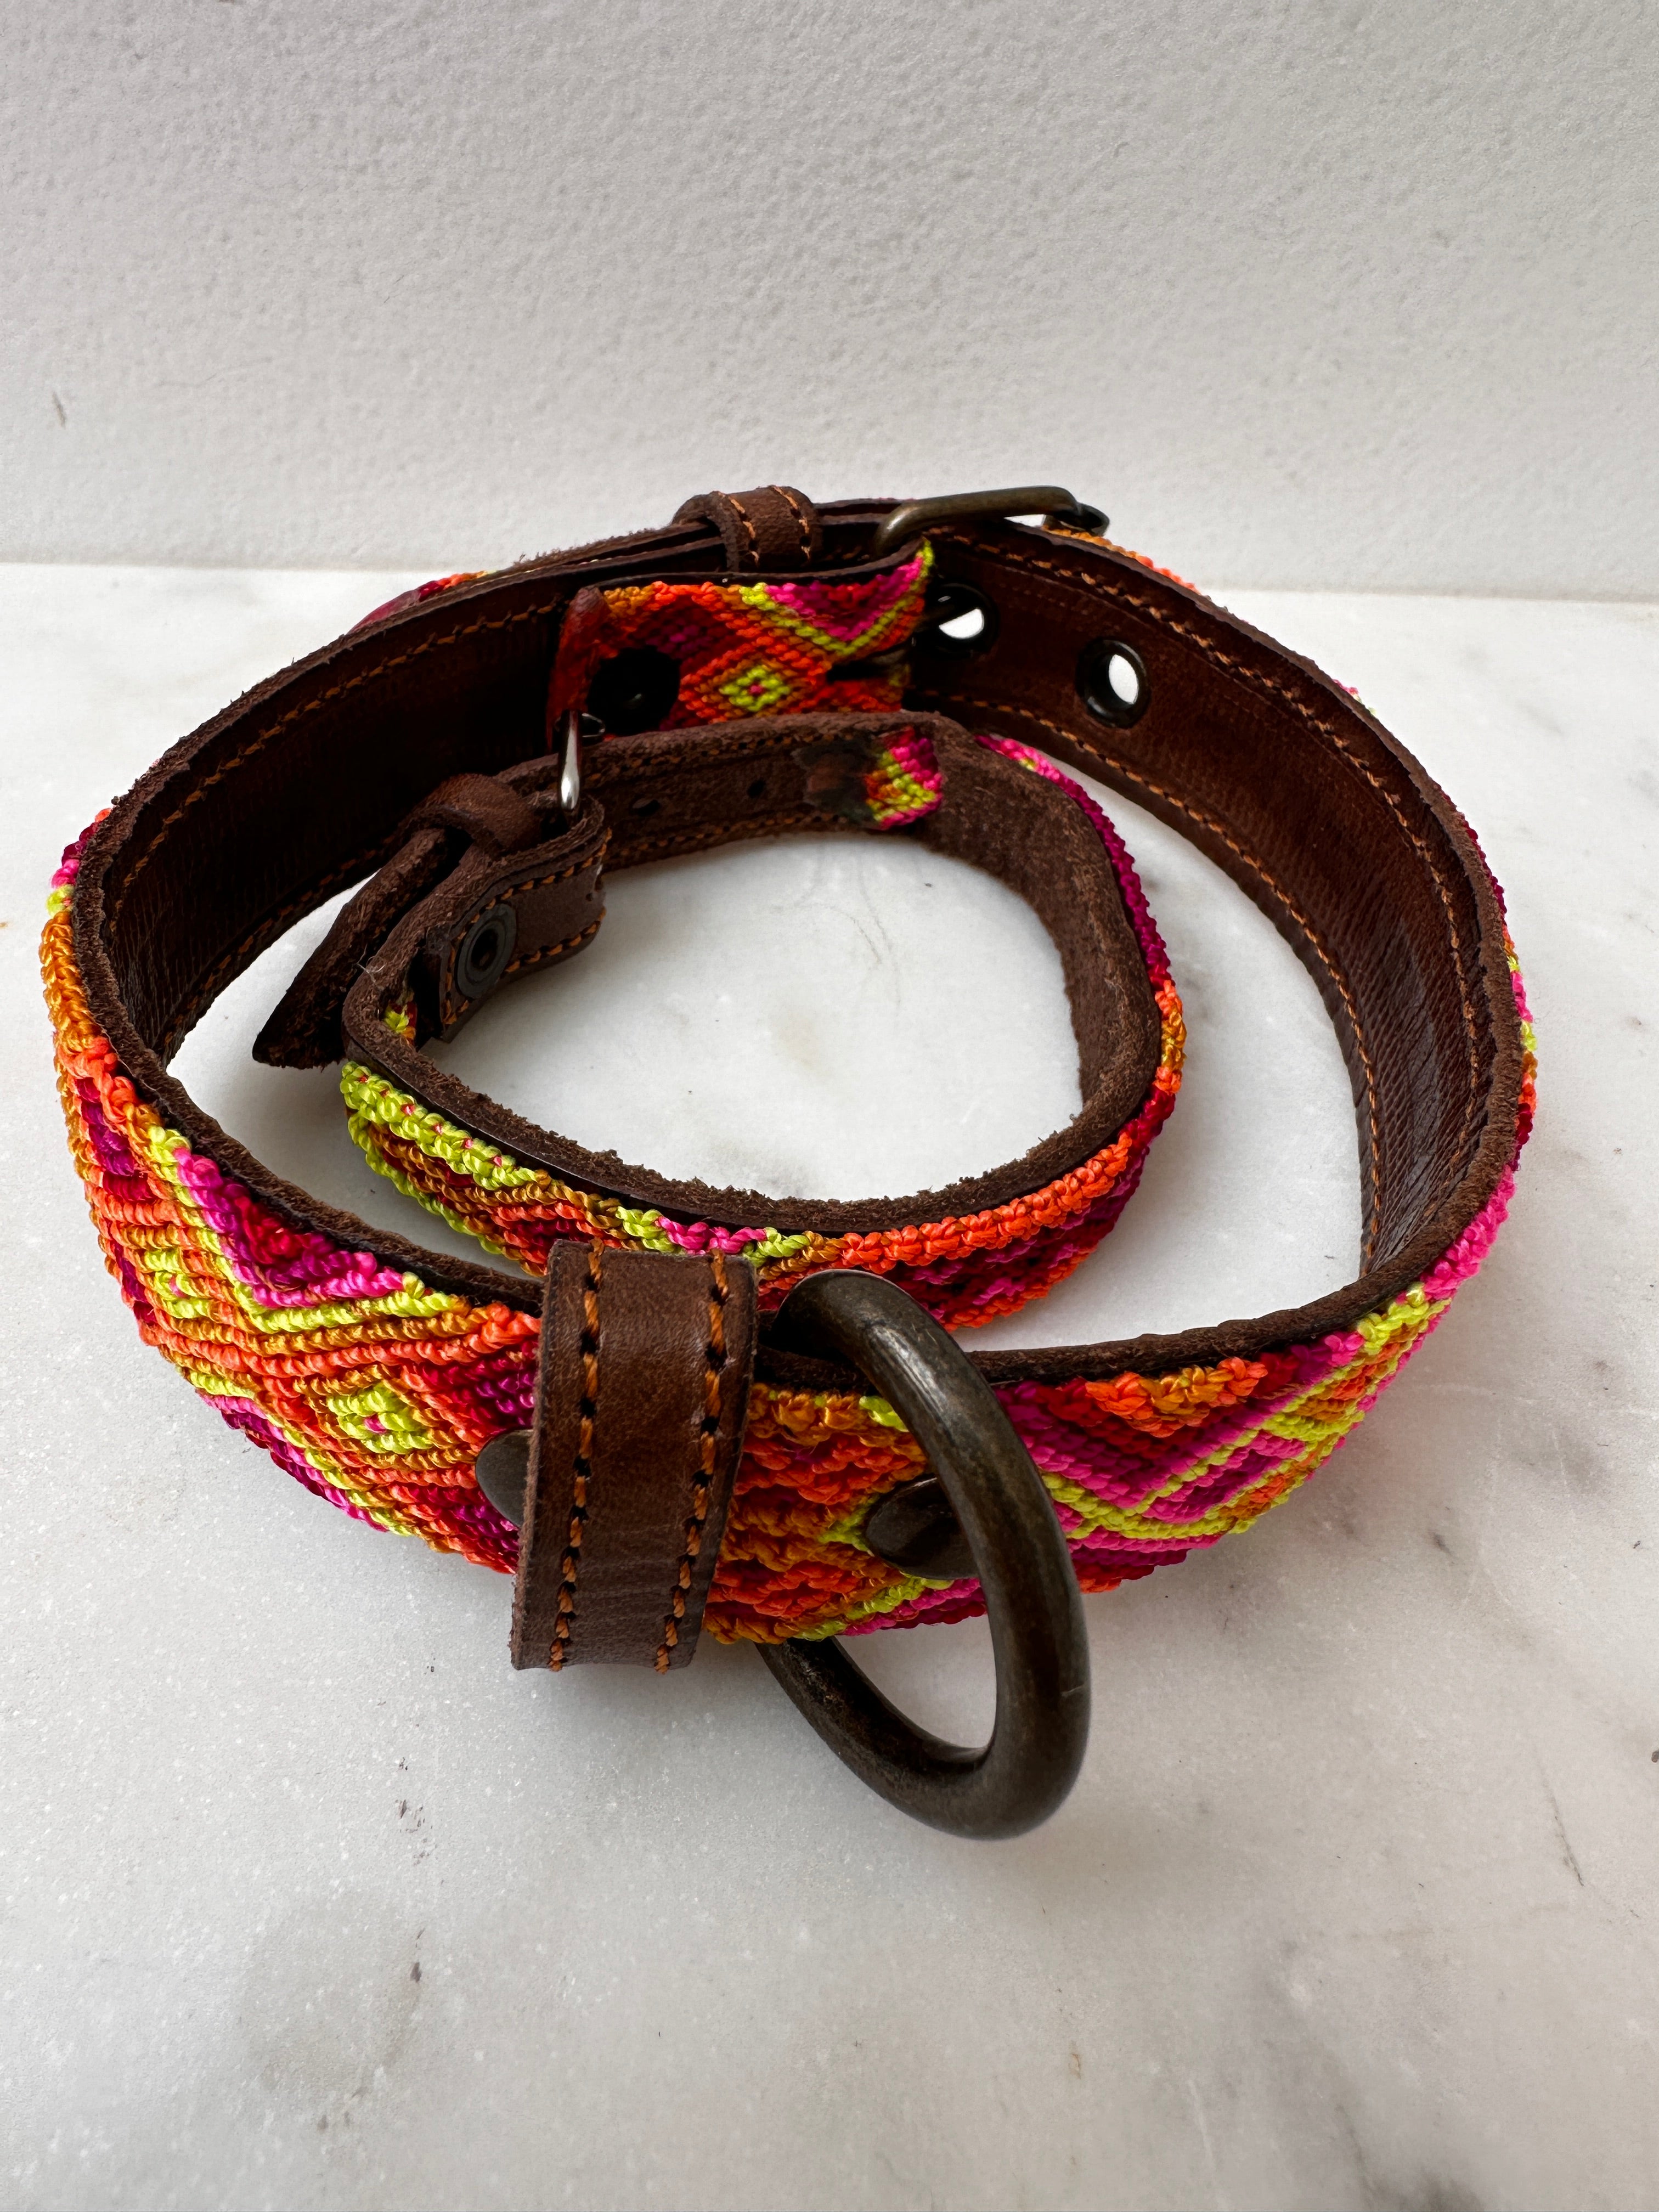 Future Nomads Homewares One Size Huichol Fully Embroidered Dog Collar S7